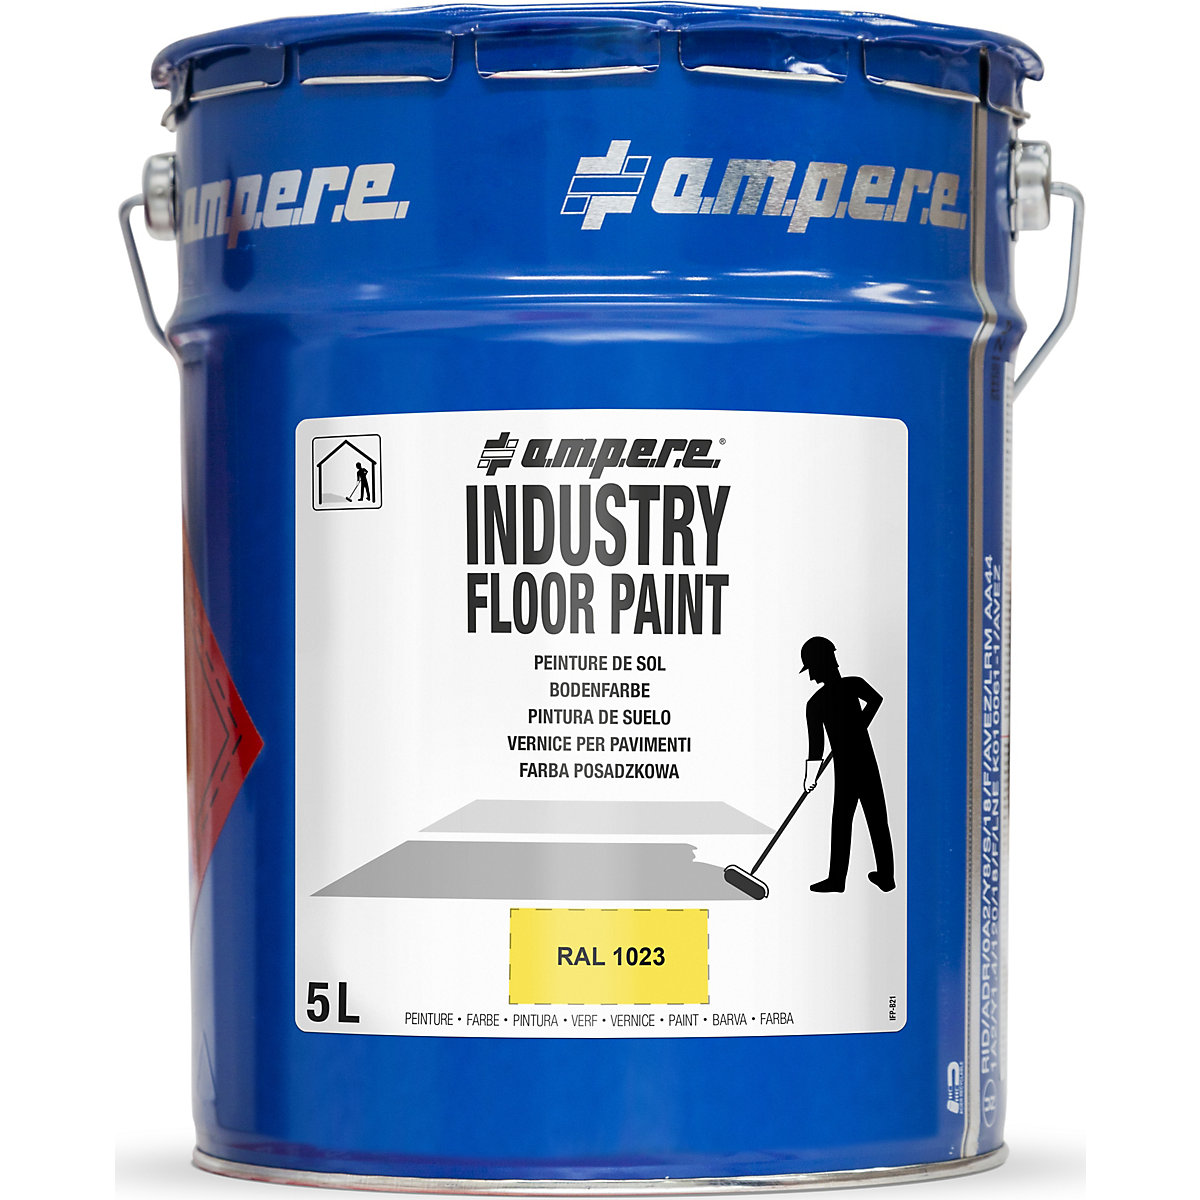 Industry Floor Paint® ground marking paint – Ampere, capacity 5 l, yellow-6